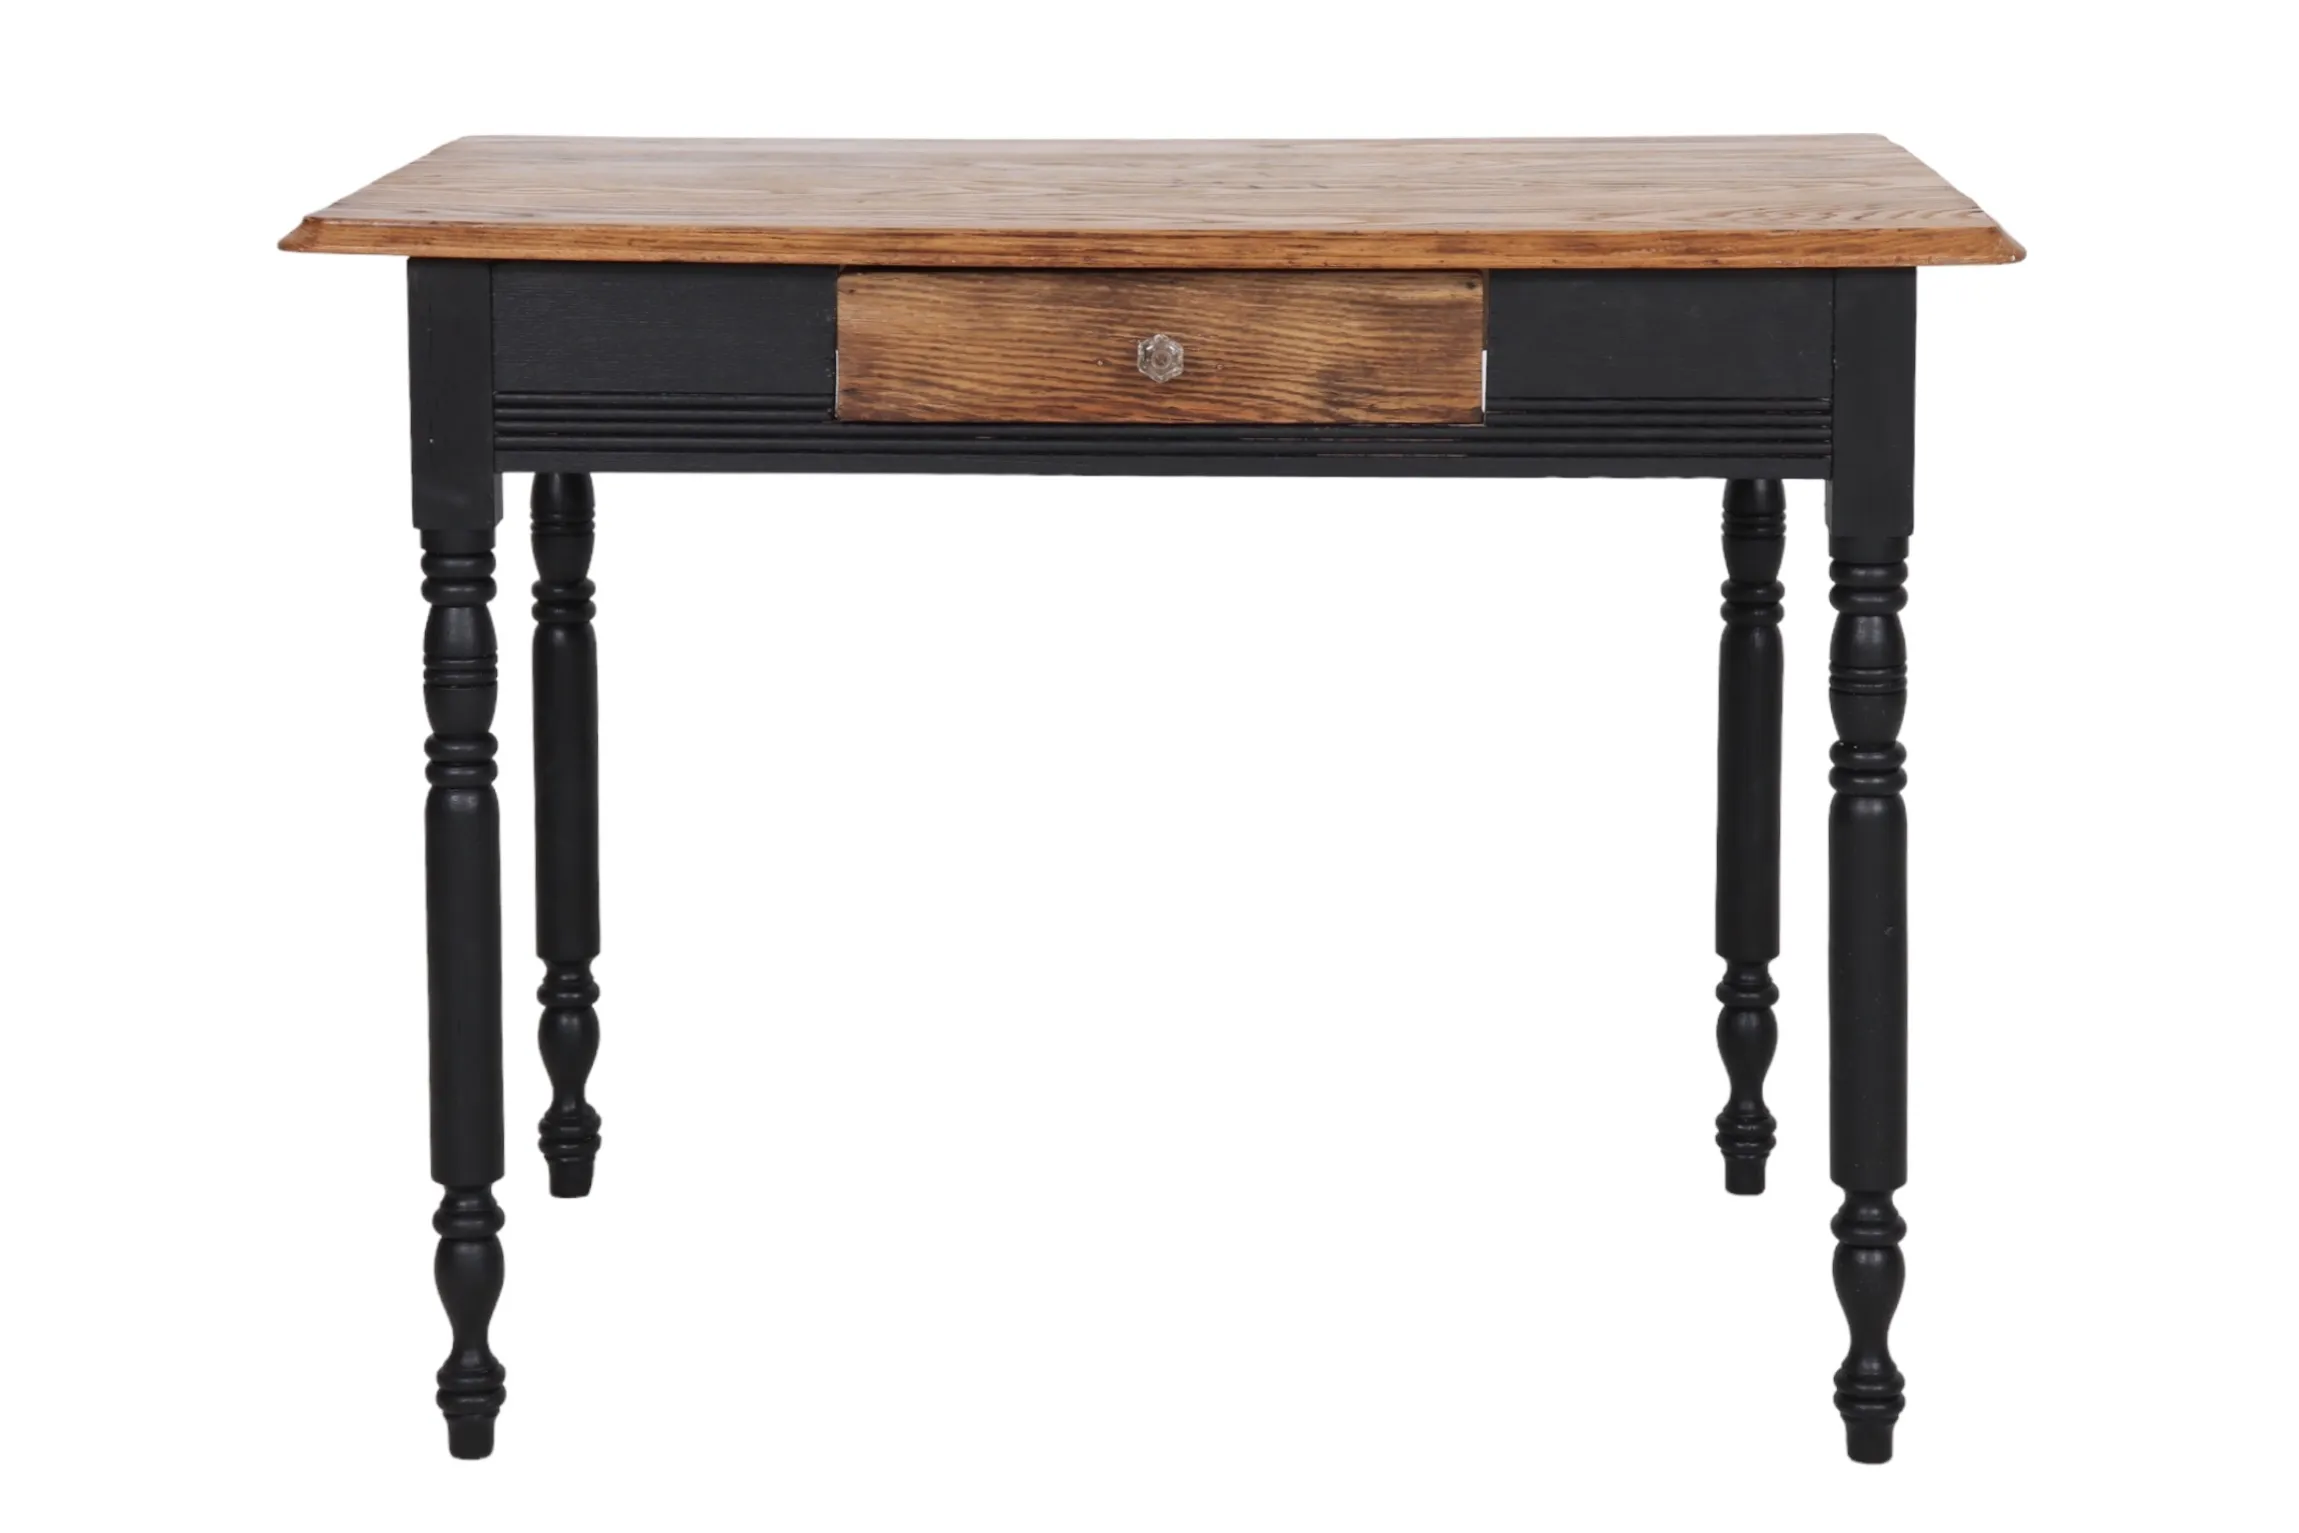 Farmhouse Style Dining Table - Interesting Things - Handcrafted